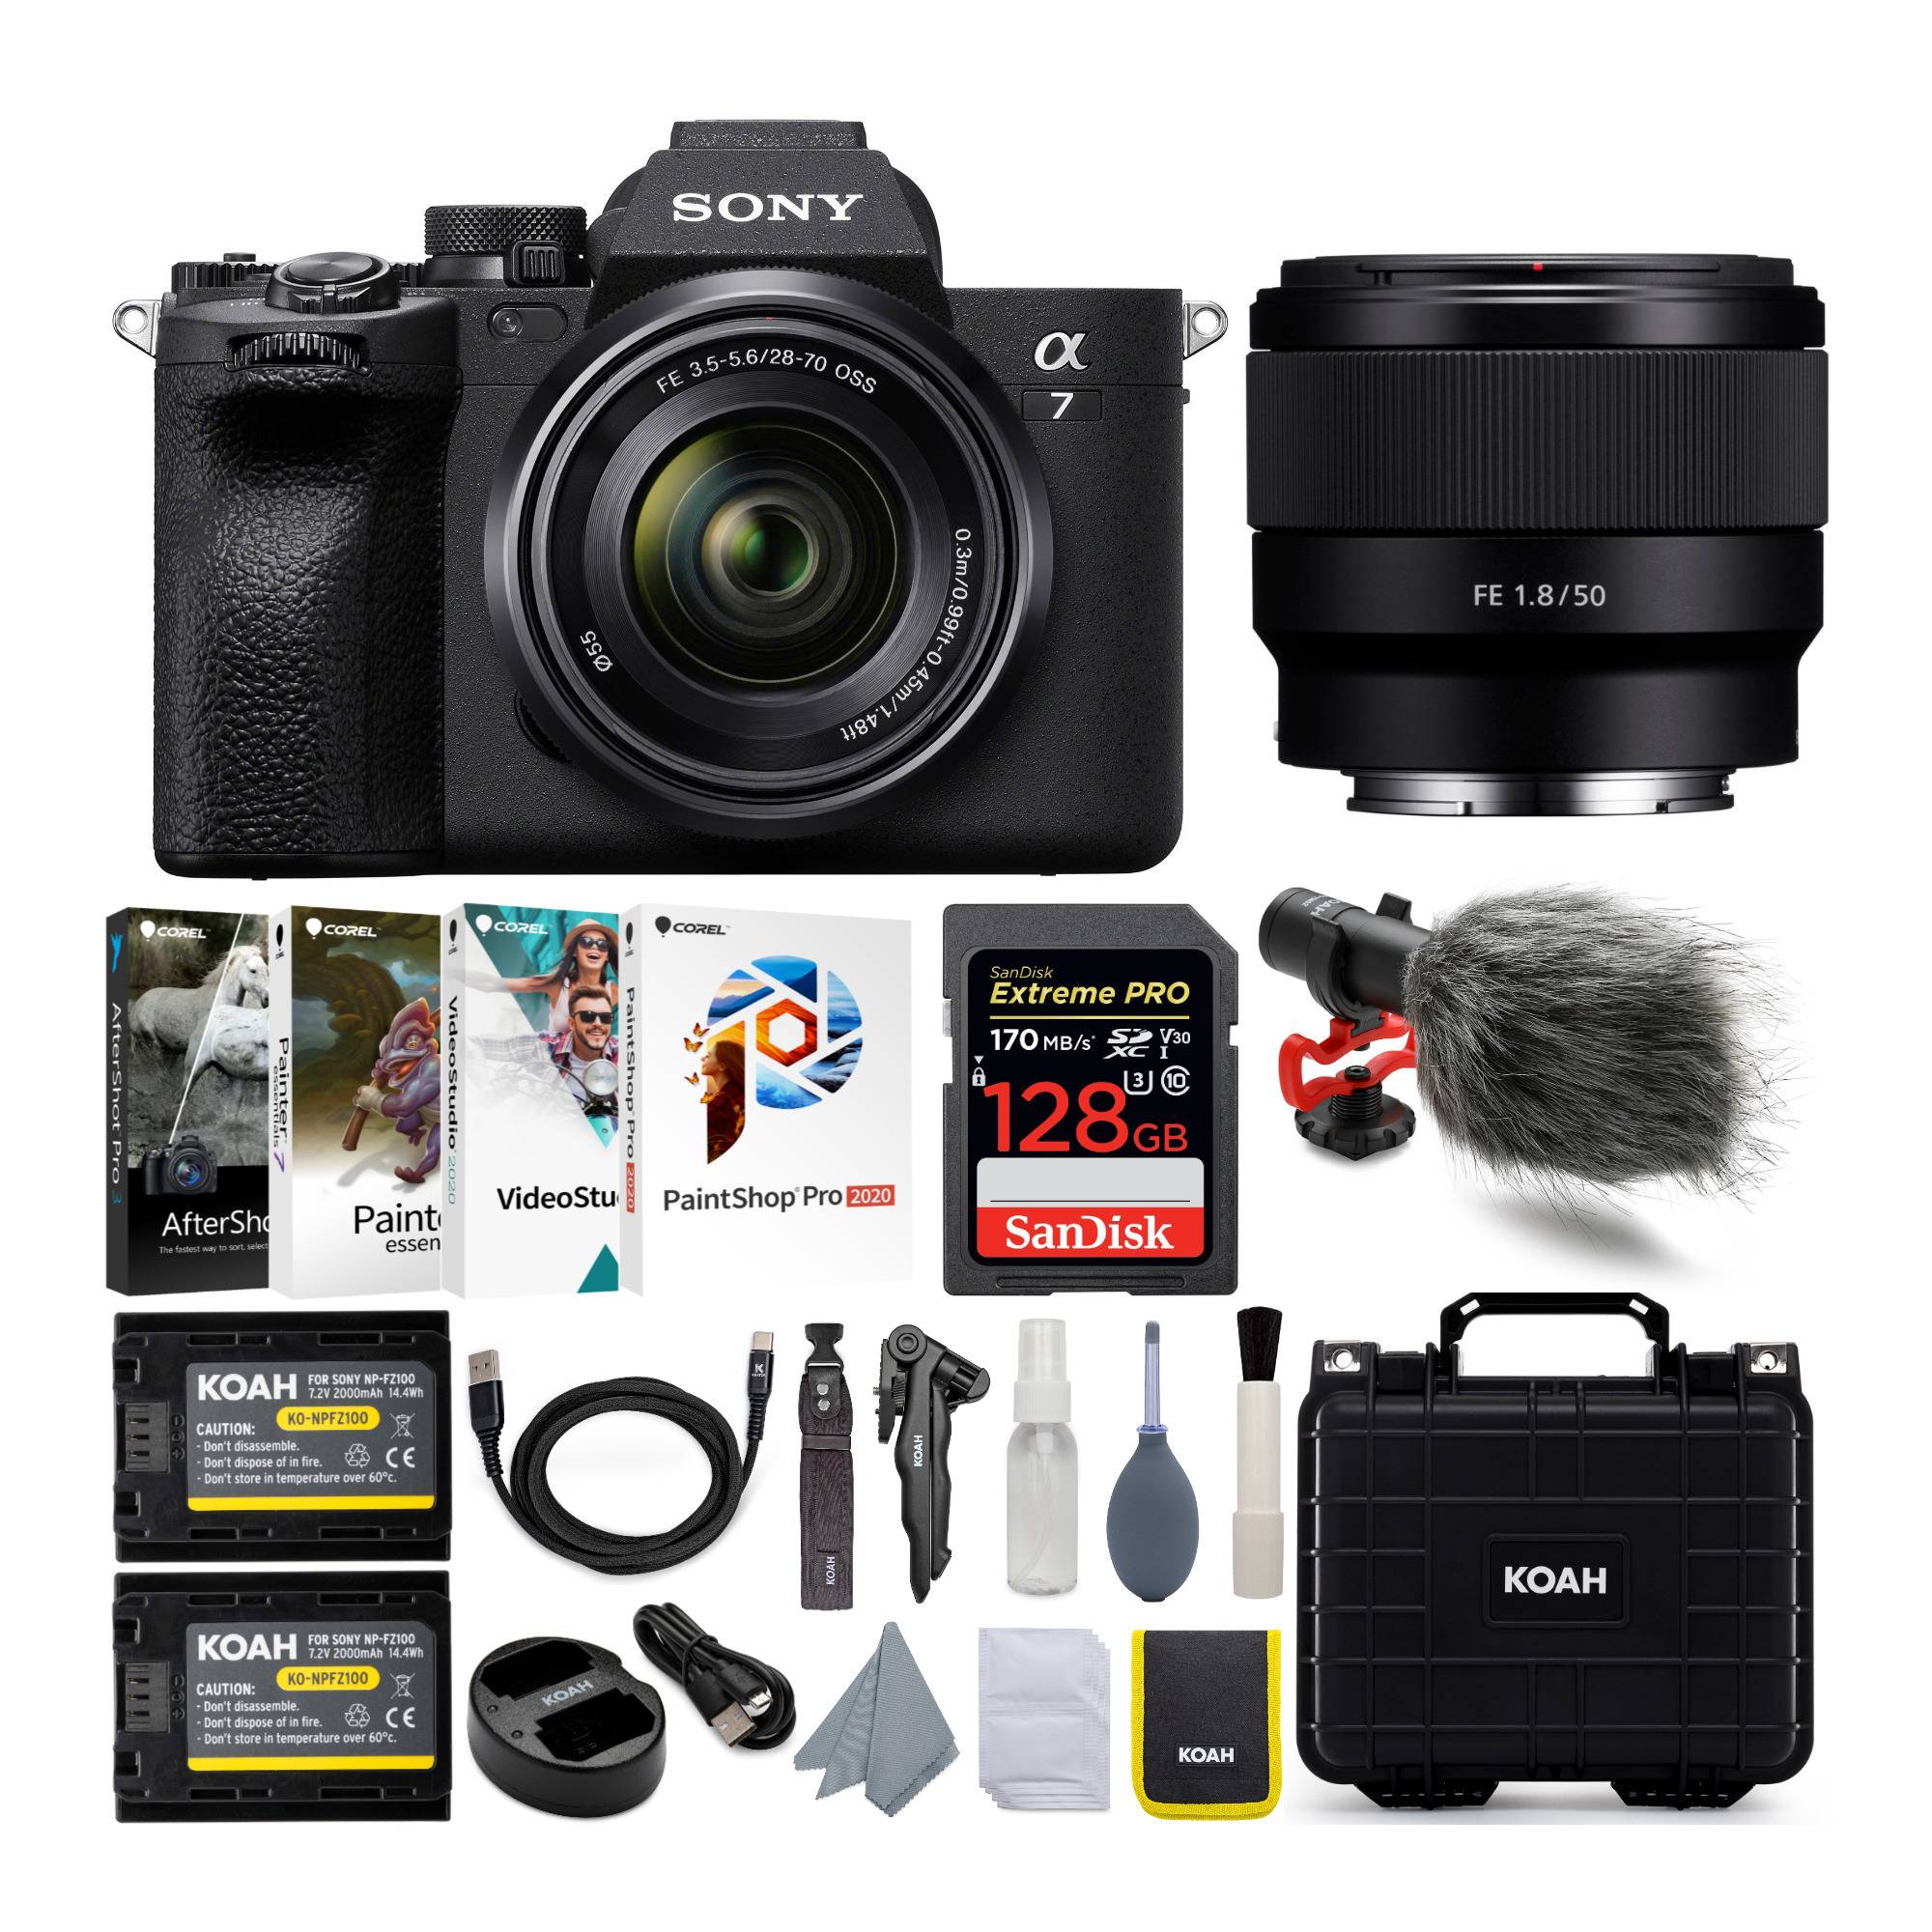 Sony Alpha 7 IV Full Frame Mirrorless Camera with 28-70mm and FE 50mm f/1.8 Lens Kit